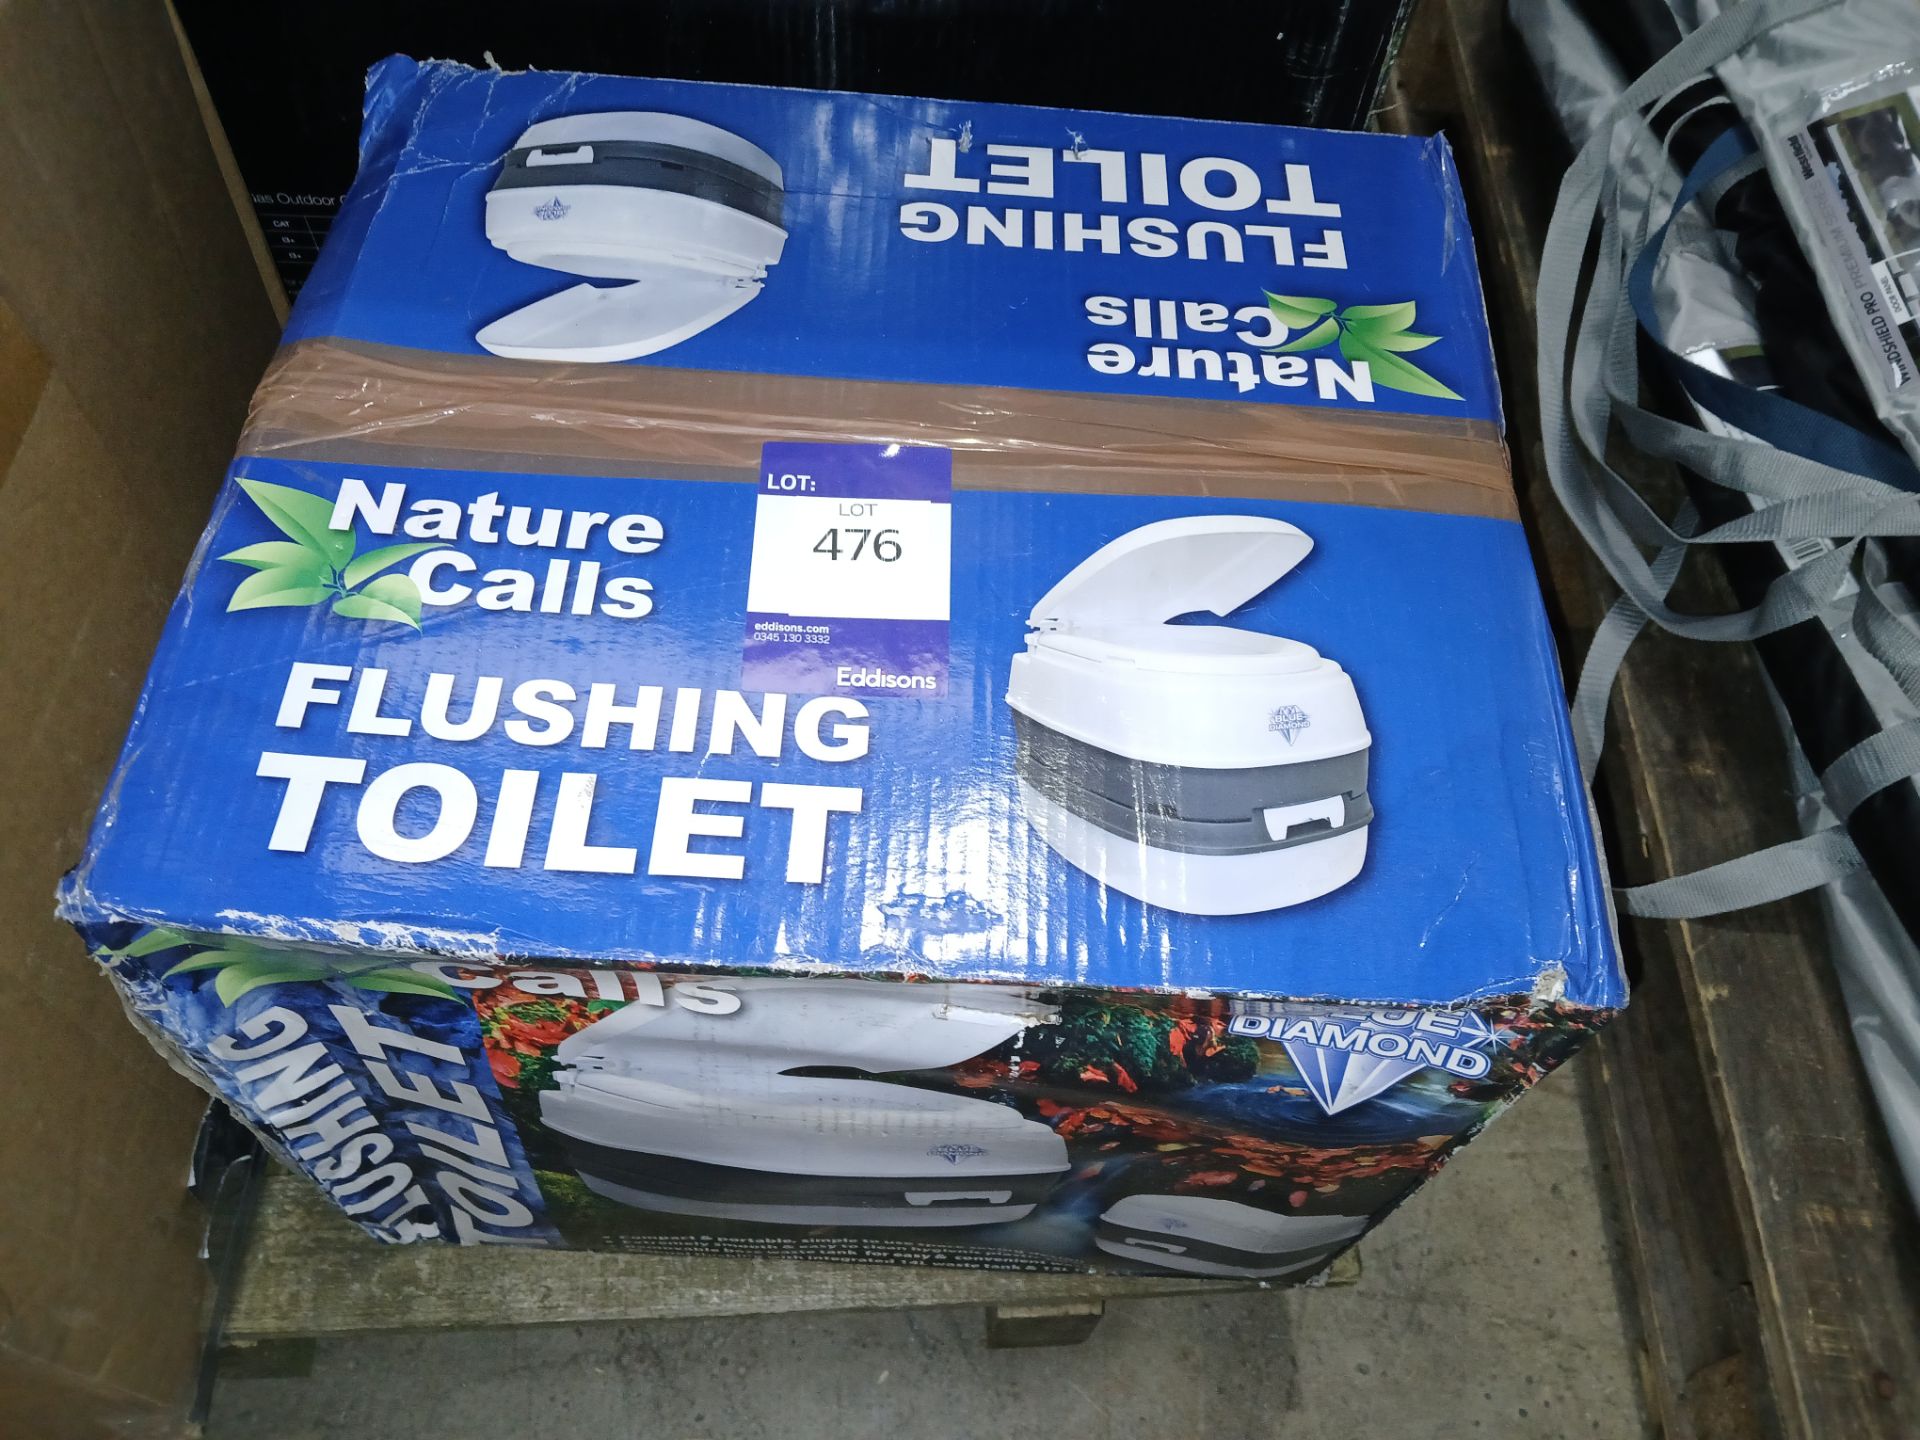 Nature Calls Flushing Toilet (Please note, Viewing Strongly Recommended - Eddisons have not